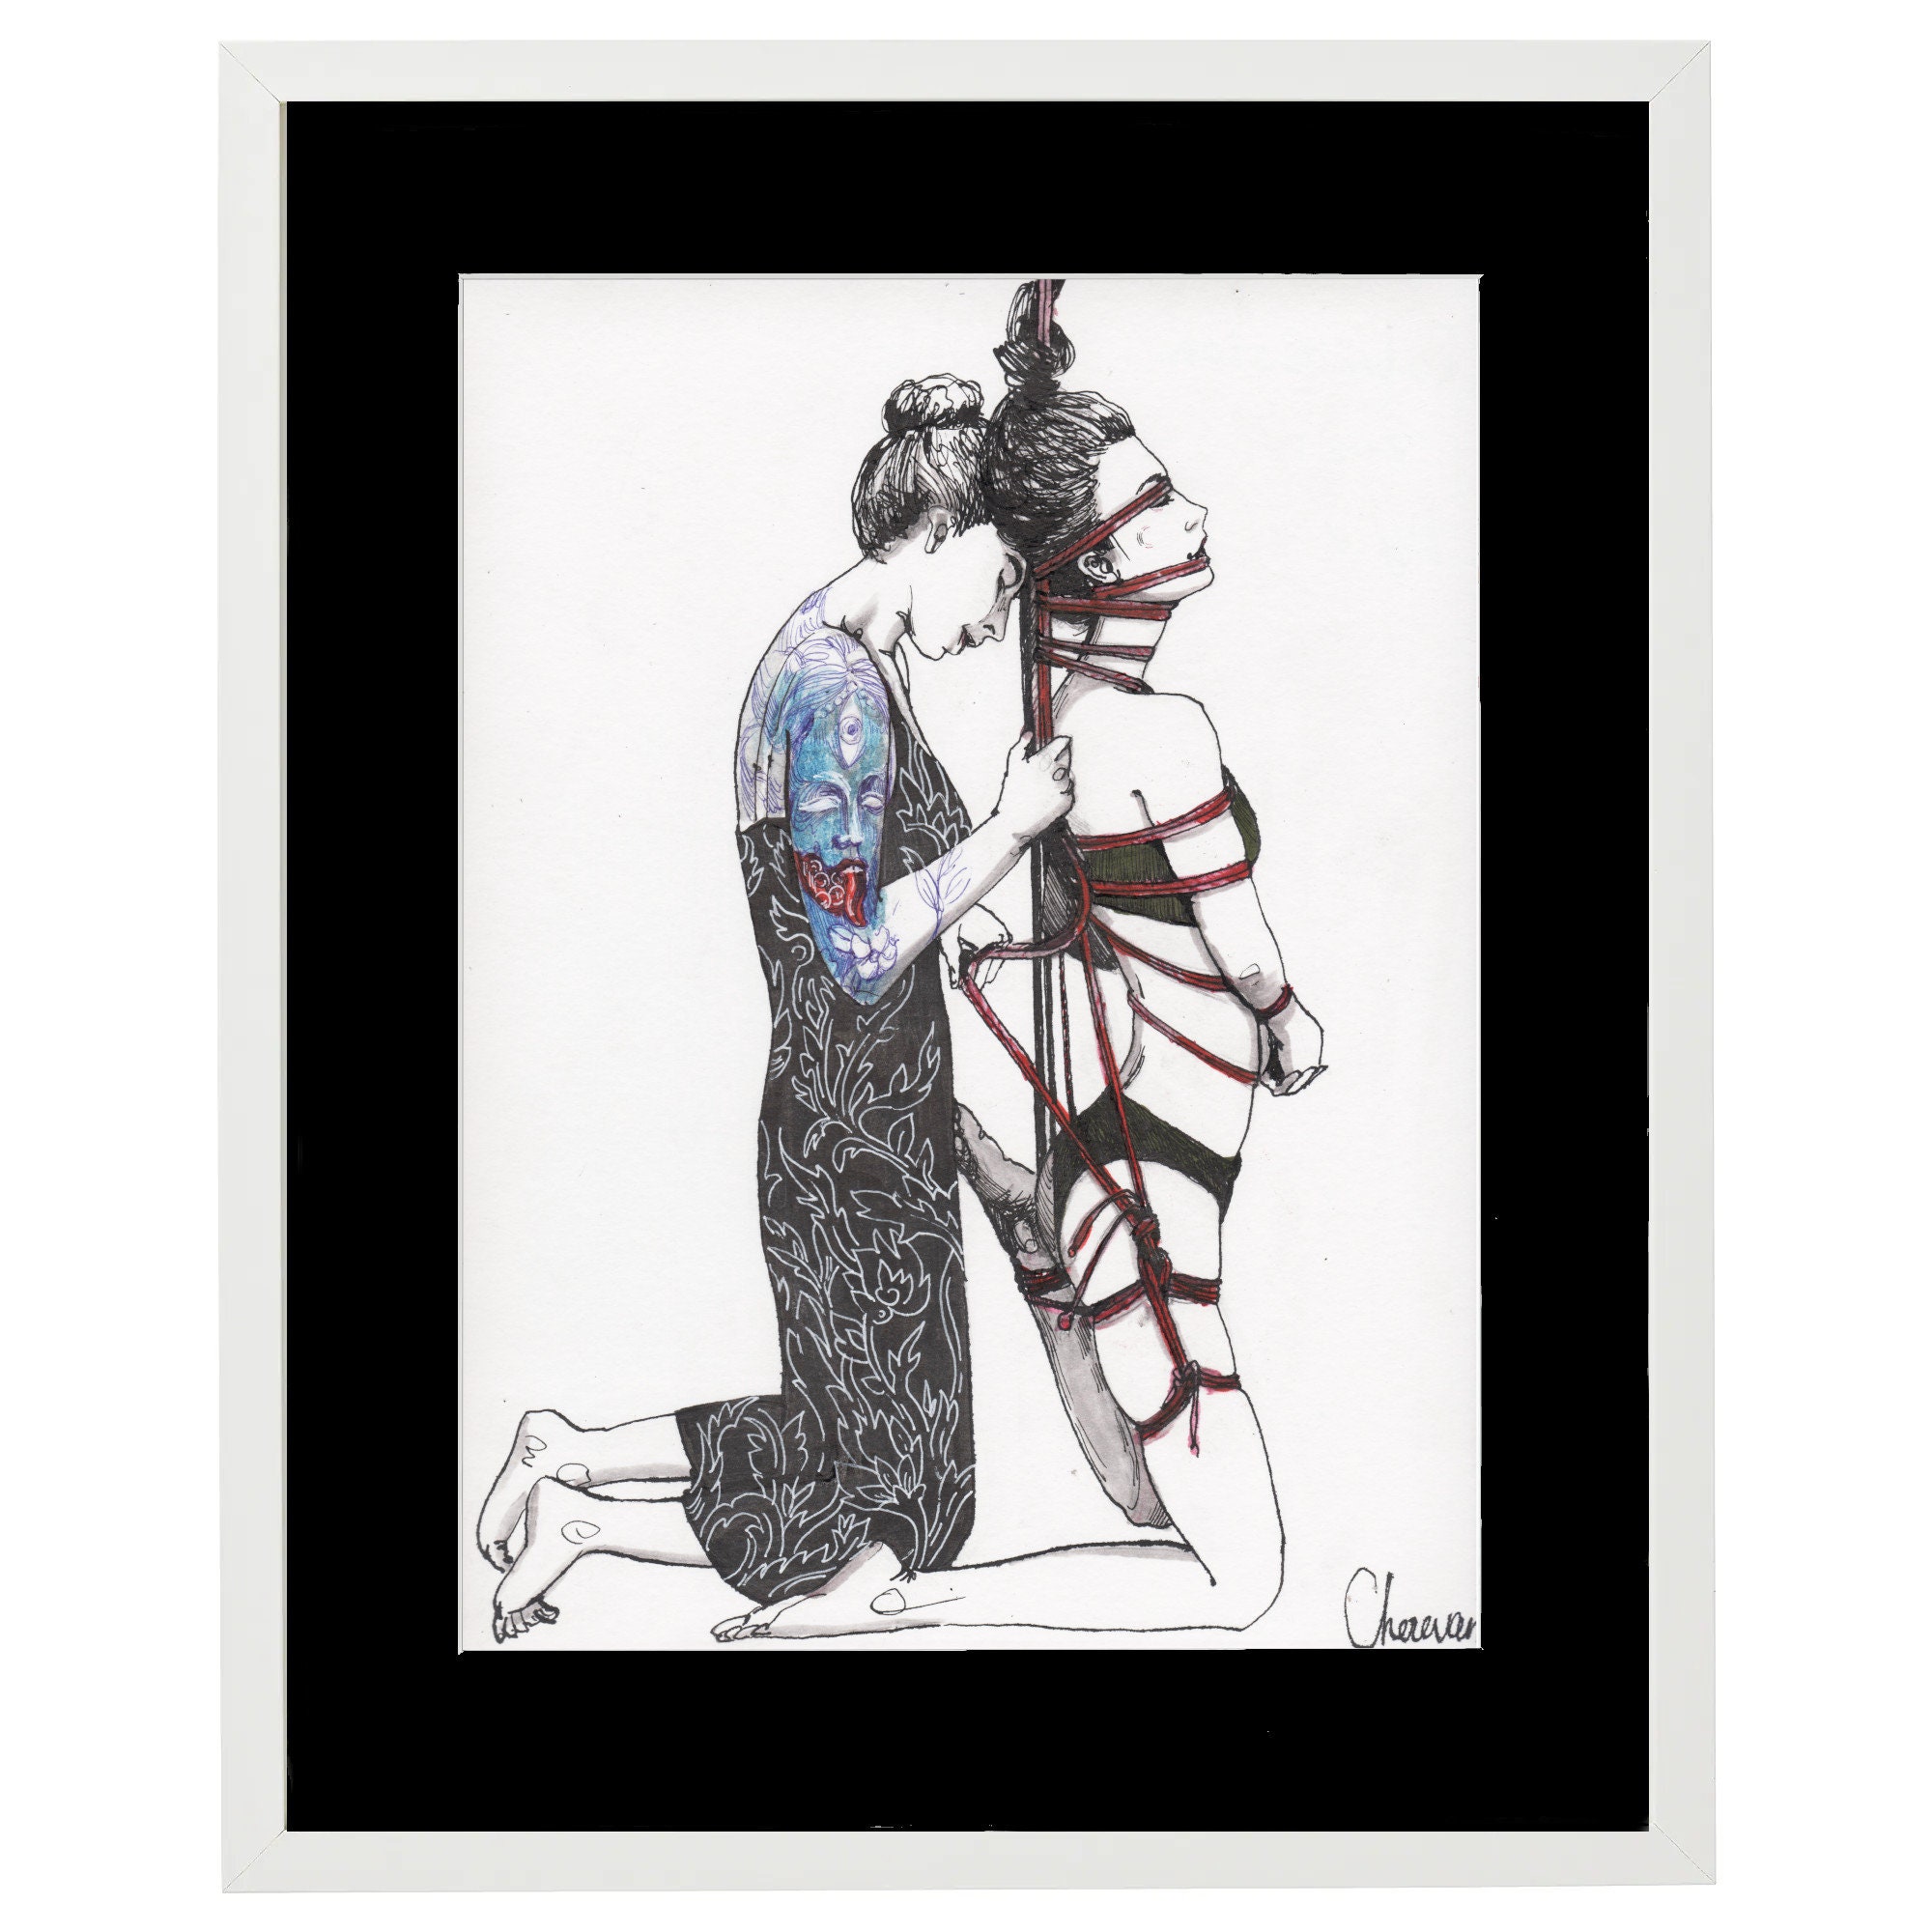 Nude Print,whipped Woman,bdsm,sexy,erotic Art,fetish Print,naked Woman  Realistic Painting,japan Bondage Art,gift for Man,bedroom Decor,3362 -   Denmark